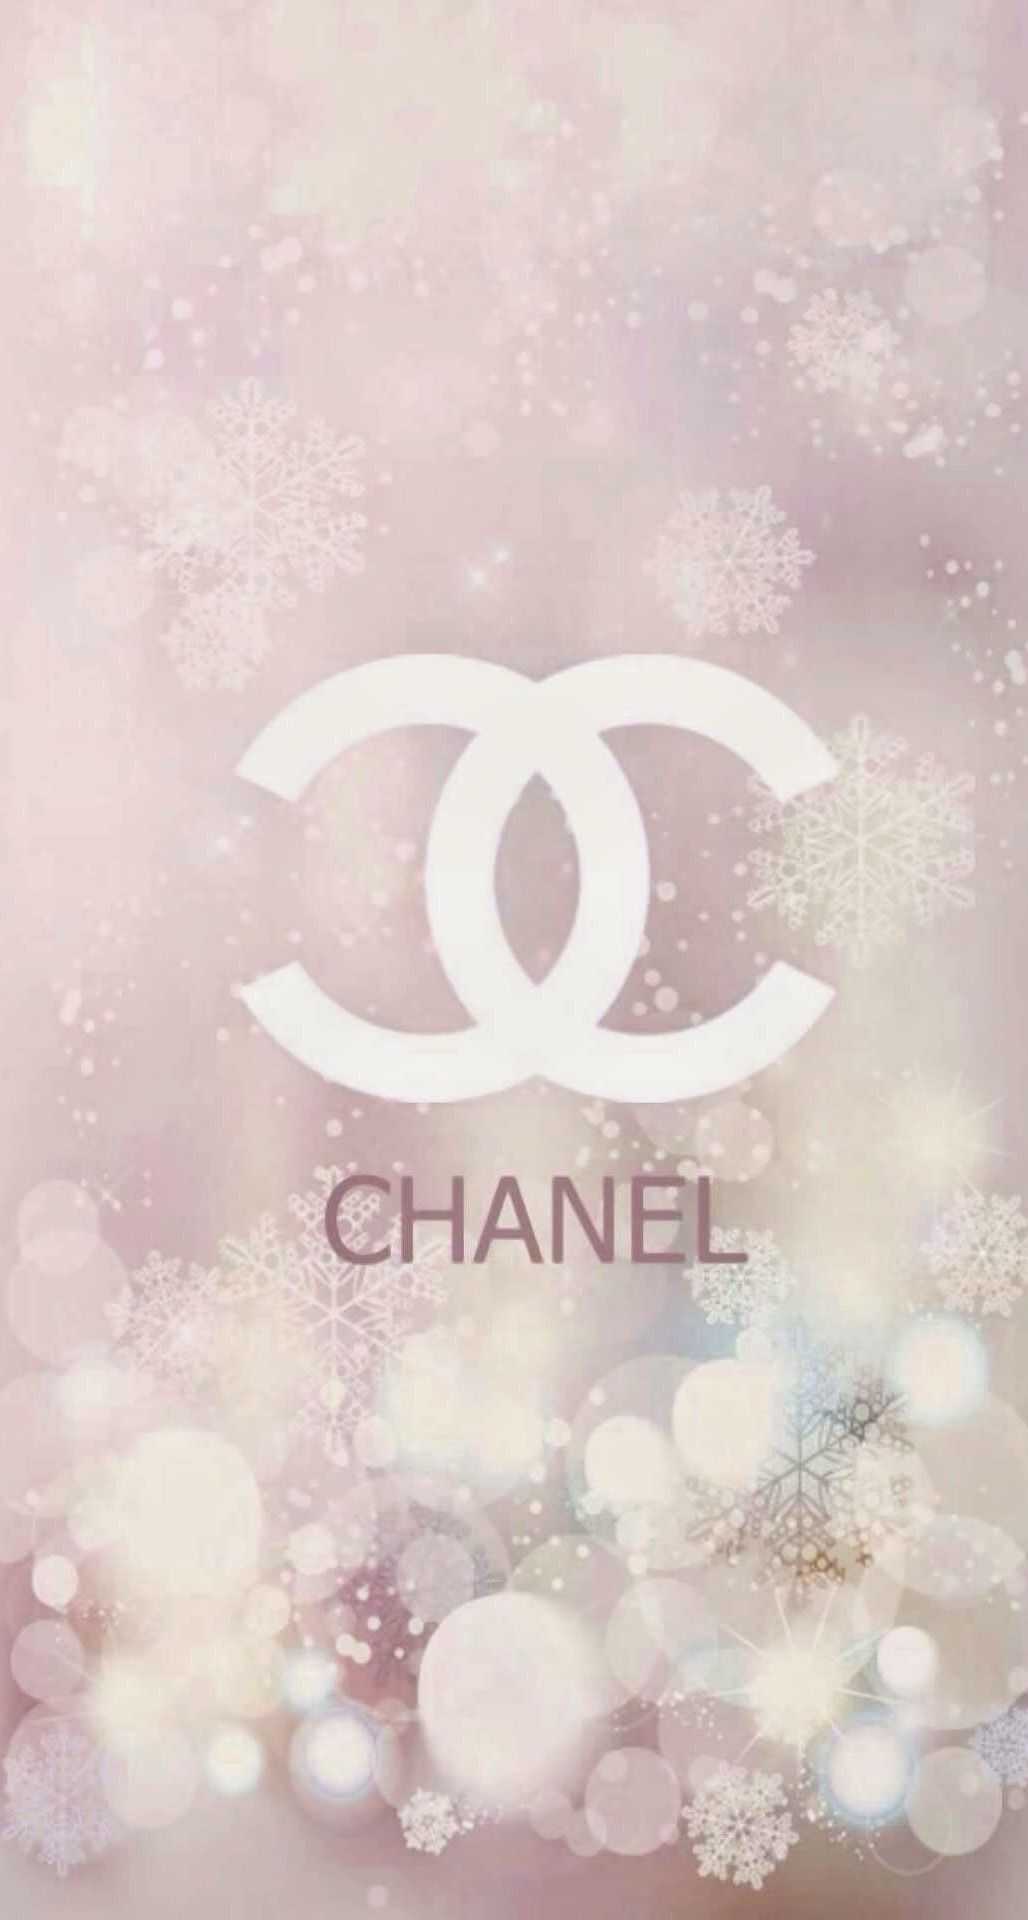 Chanel wallpaper for iPhone and Android! - Chanel